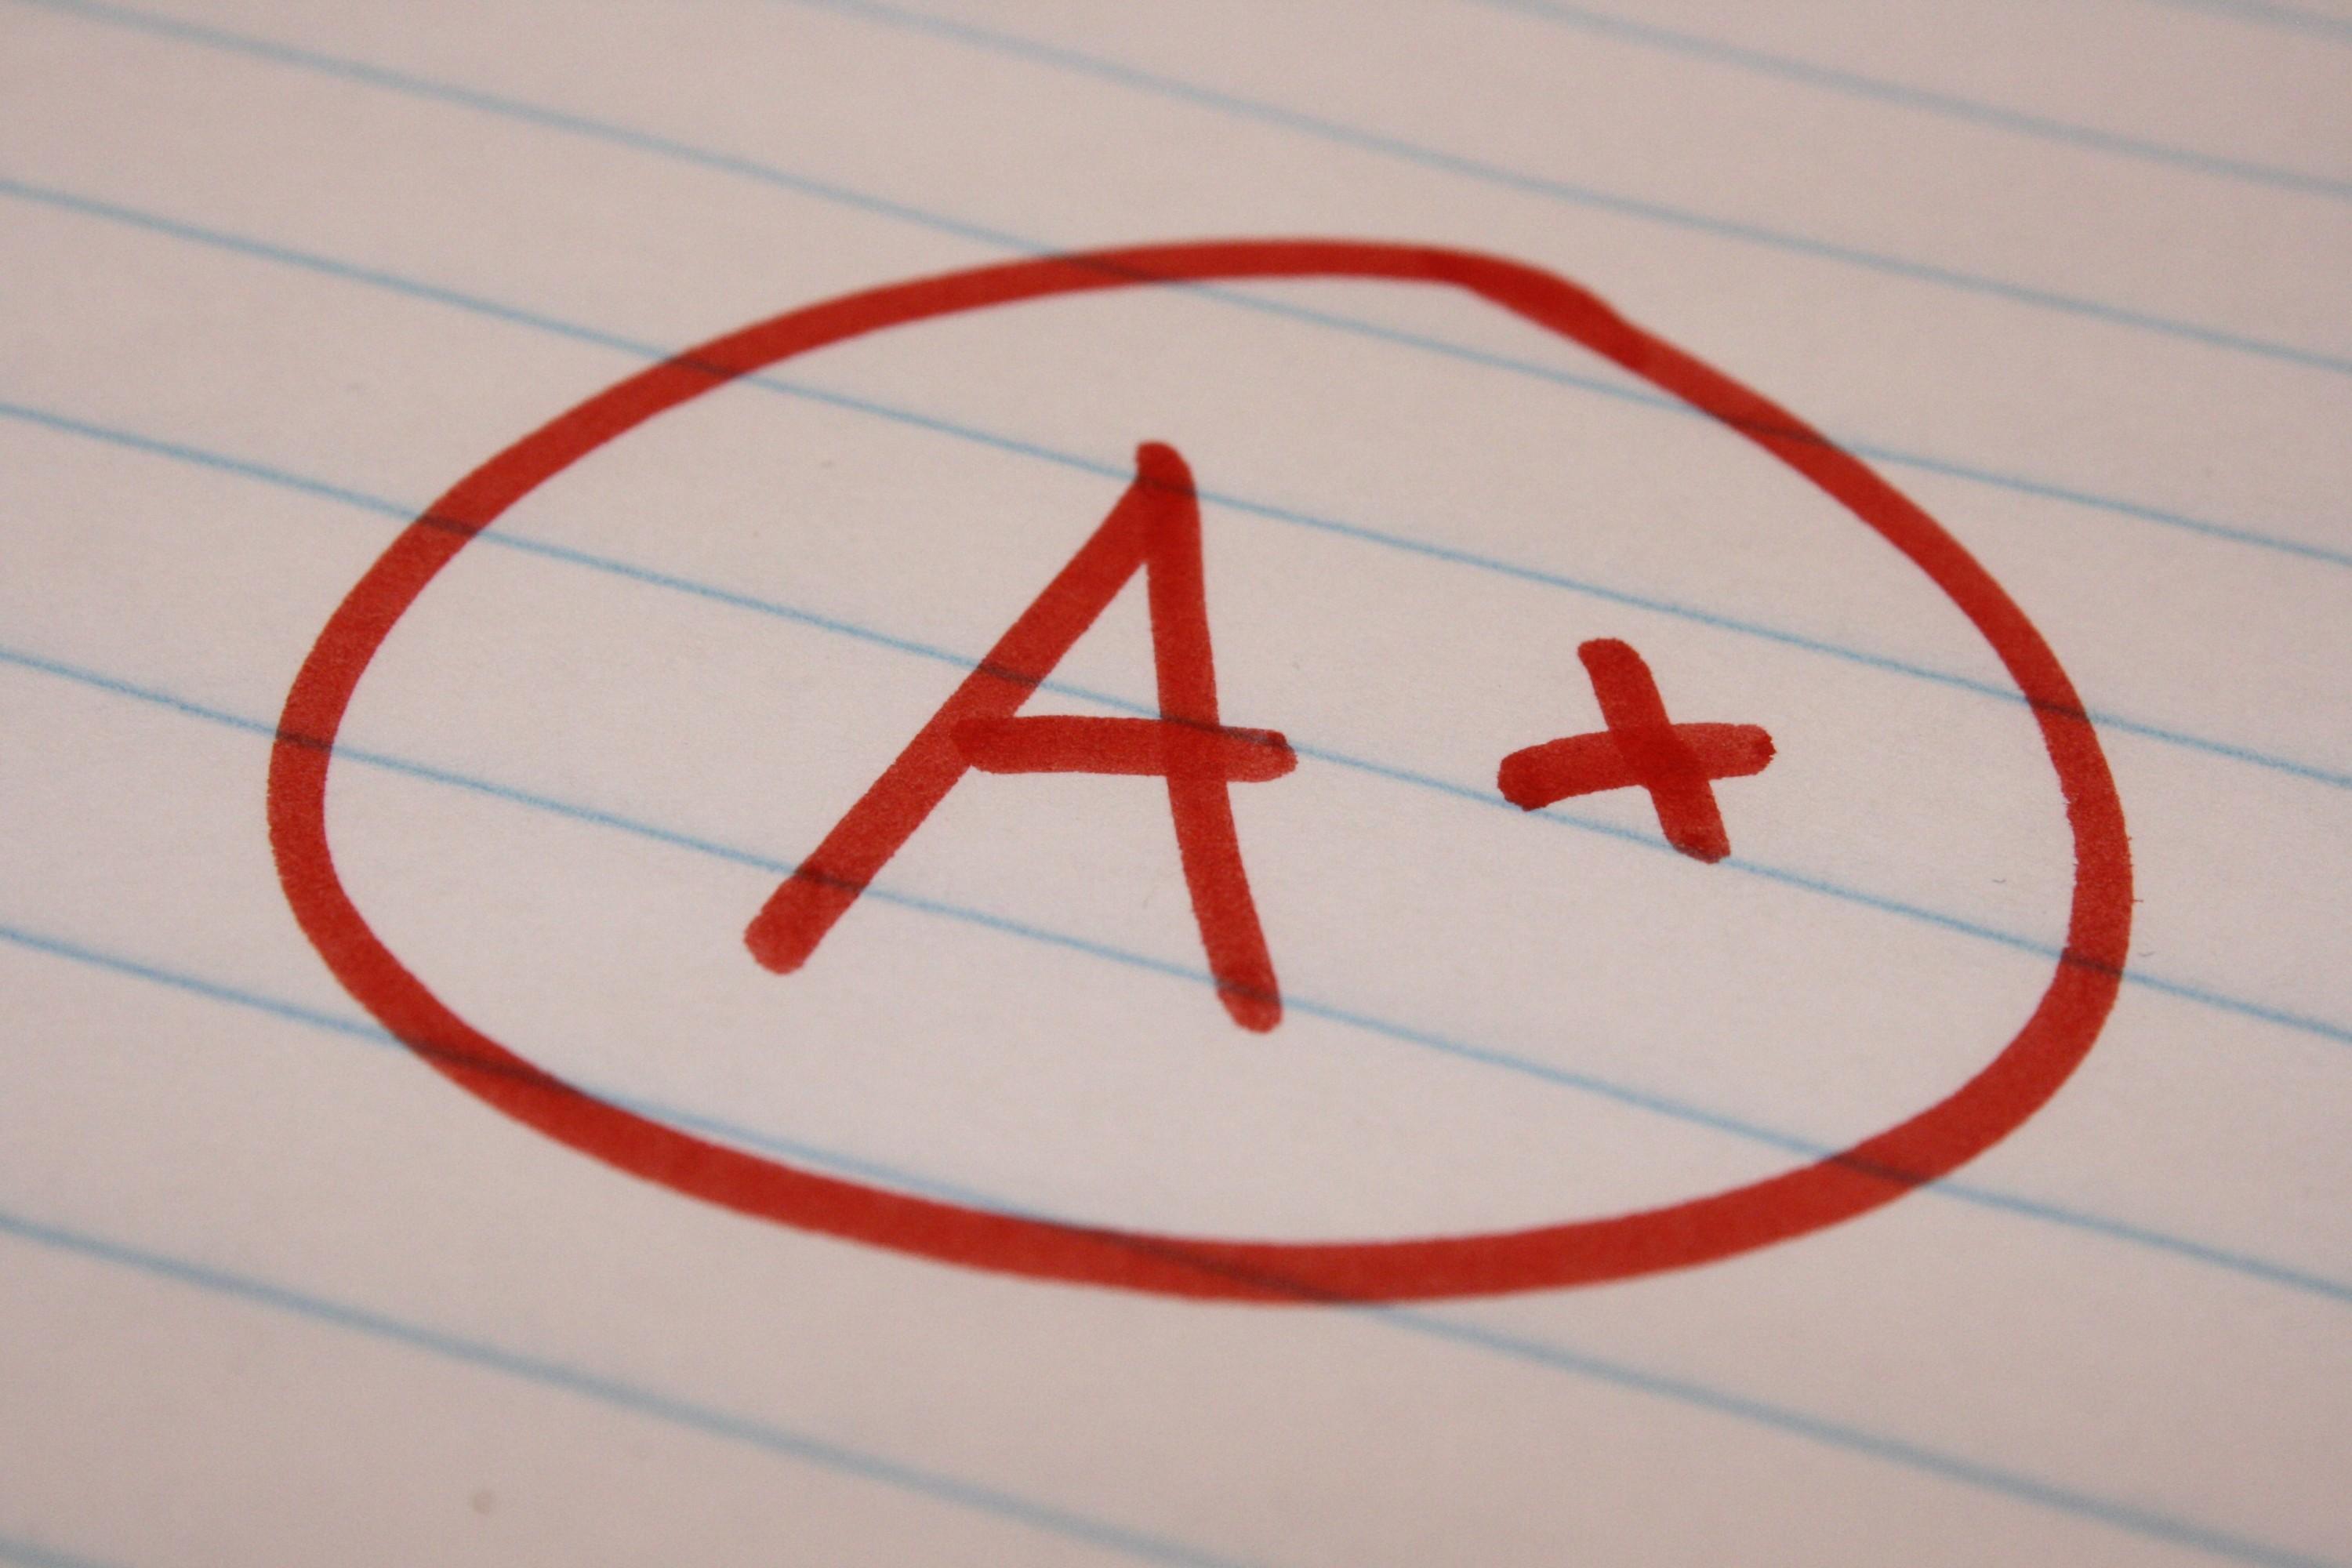 A+ Grade Rounded in Red on a Piece of Paper